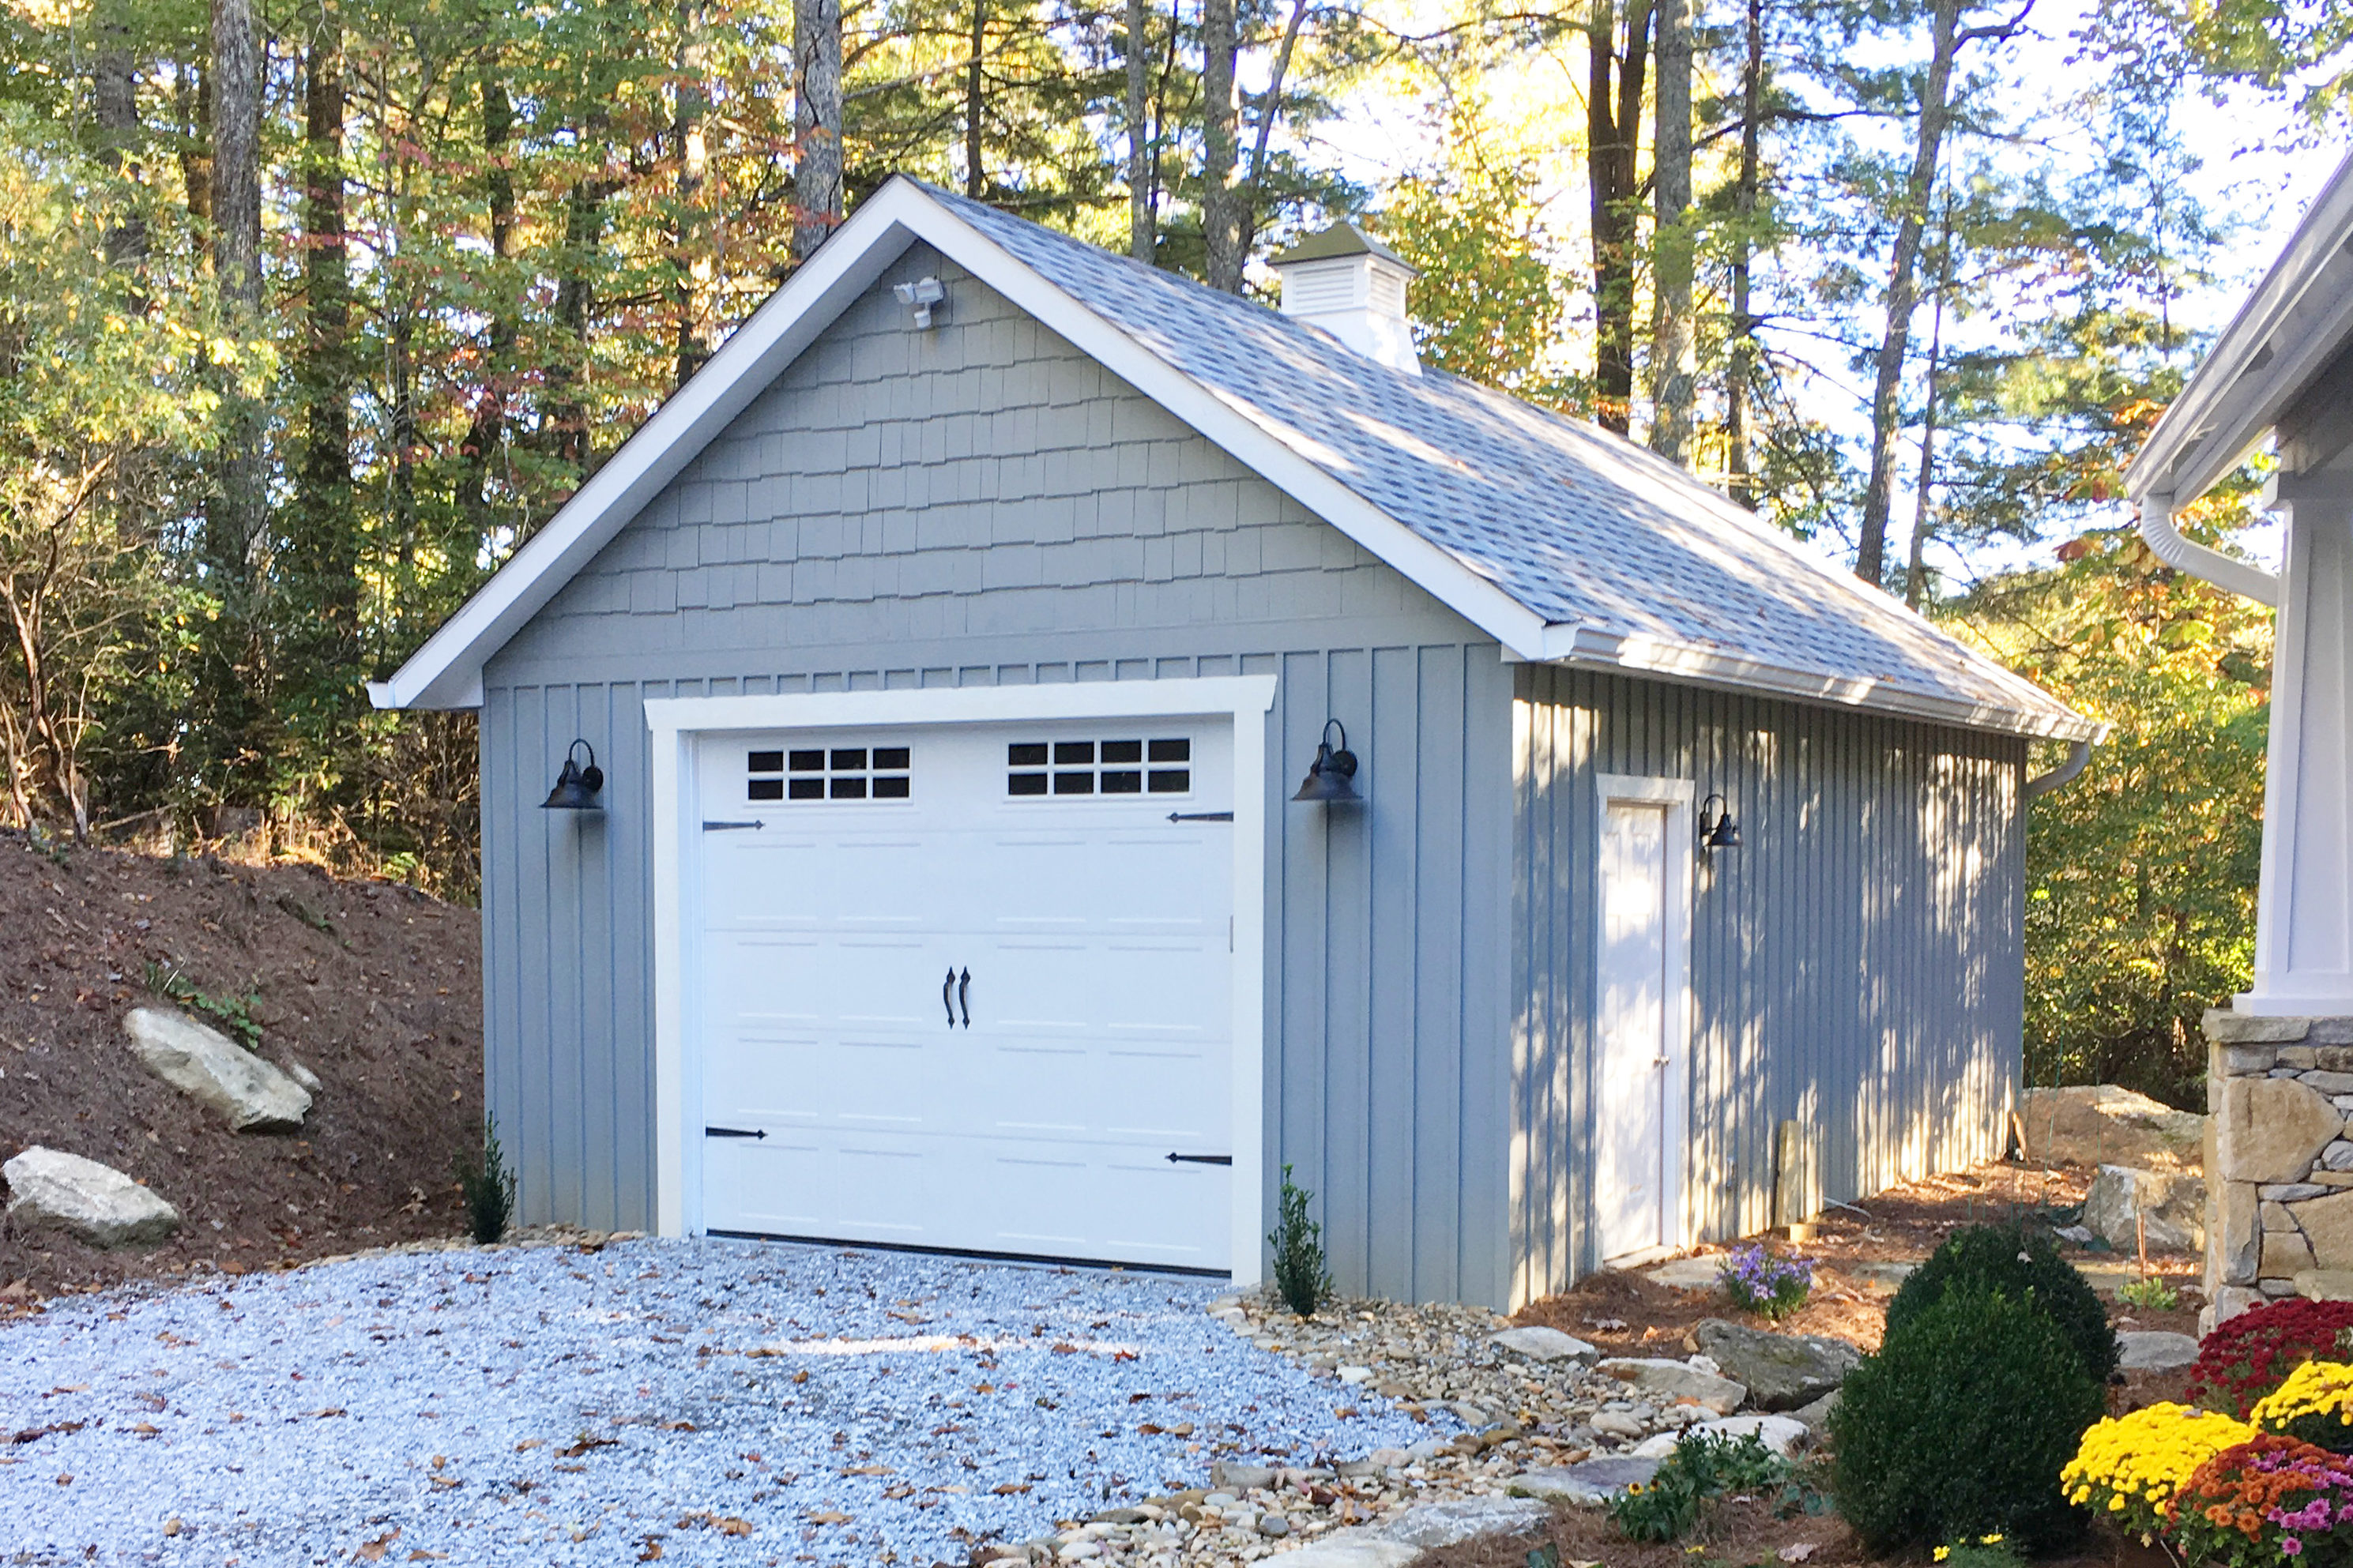 One Car Garage Sizes The Complete, What Are The Dimensions Of A Standard One Car Garage